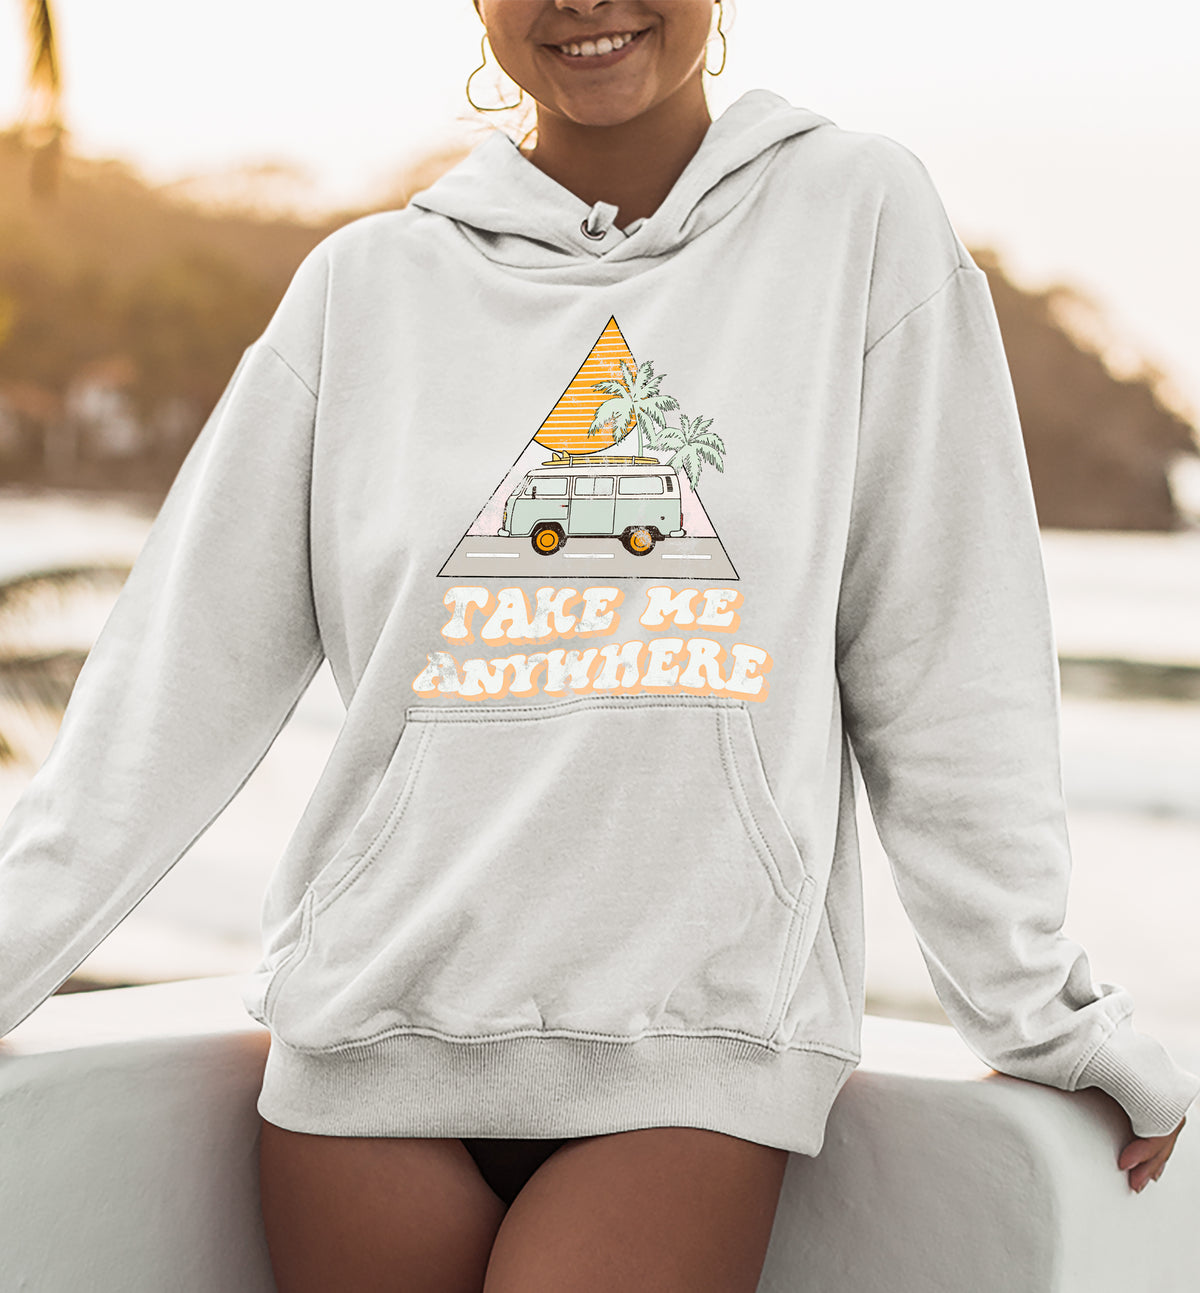 White hoodie with a hippie bus that says take me anywhere - HighCiti